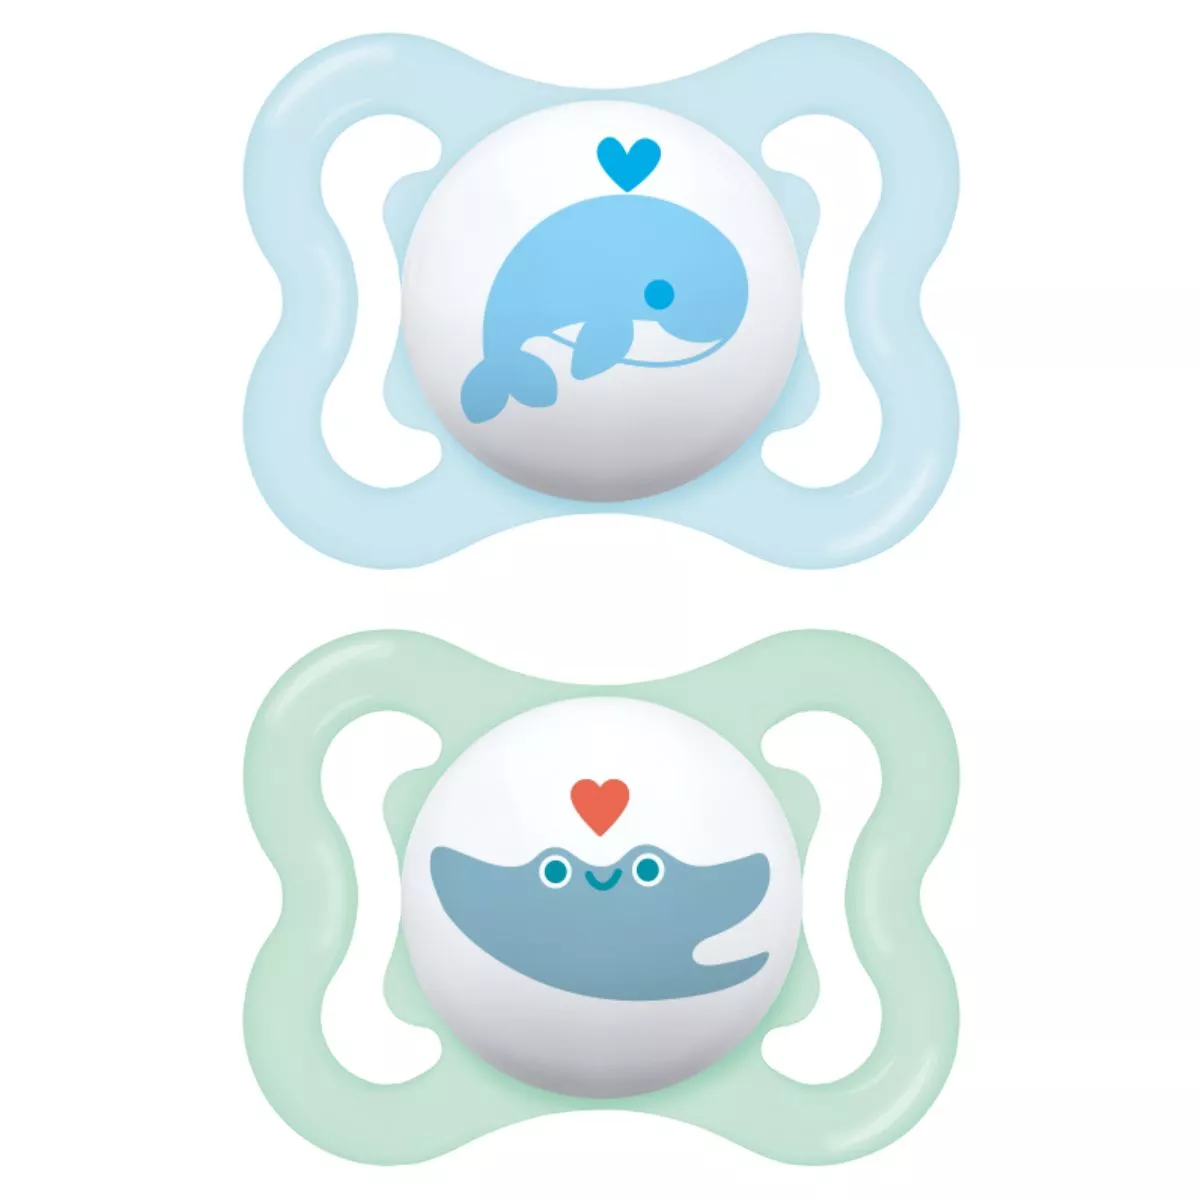 MAM Air Soother 2-6 months, set of 2